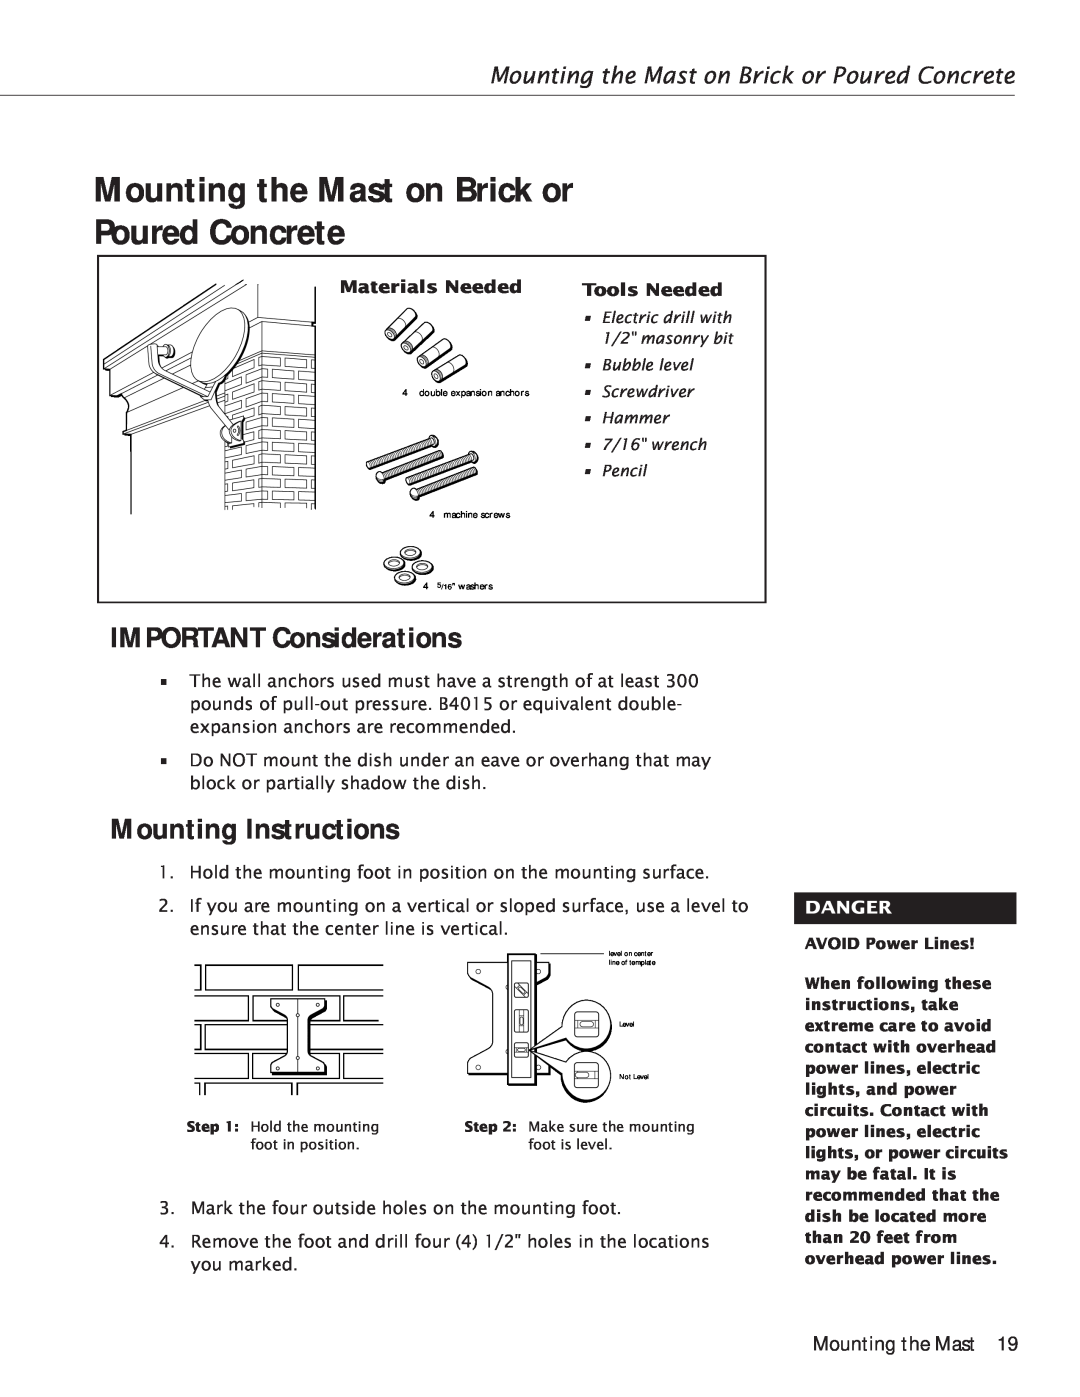 RCA Satellite TV Antenna Mounting the Mast on Brick or Poured Concrete, IMPORTANT Considerations, Mounting Instructions 